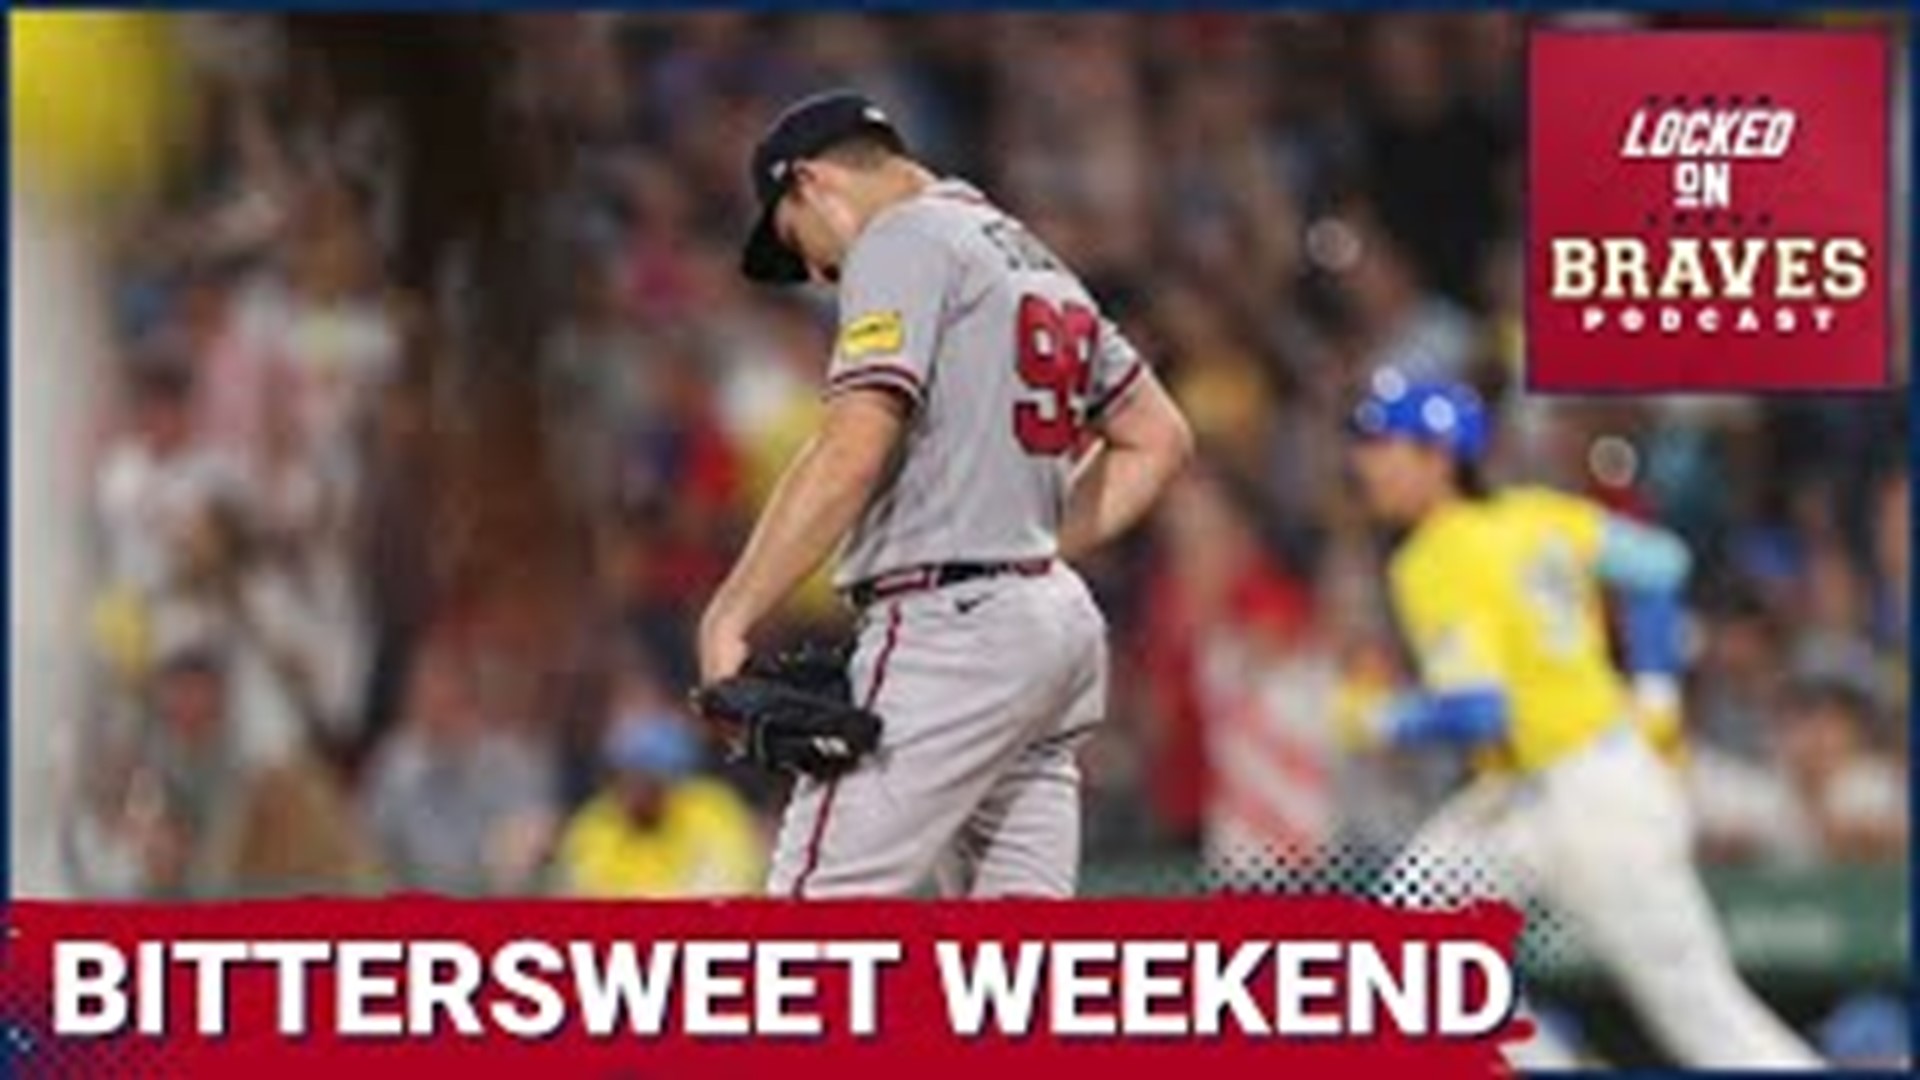 It was a bittersweet weekend for the Atlanta Braves as they had some exciting comebacks leading to a sweep of the Arizona Diamondbacks.